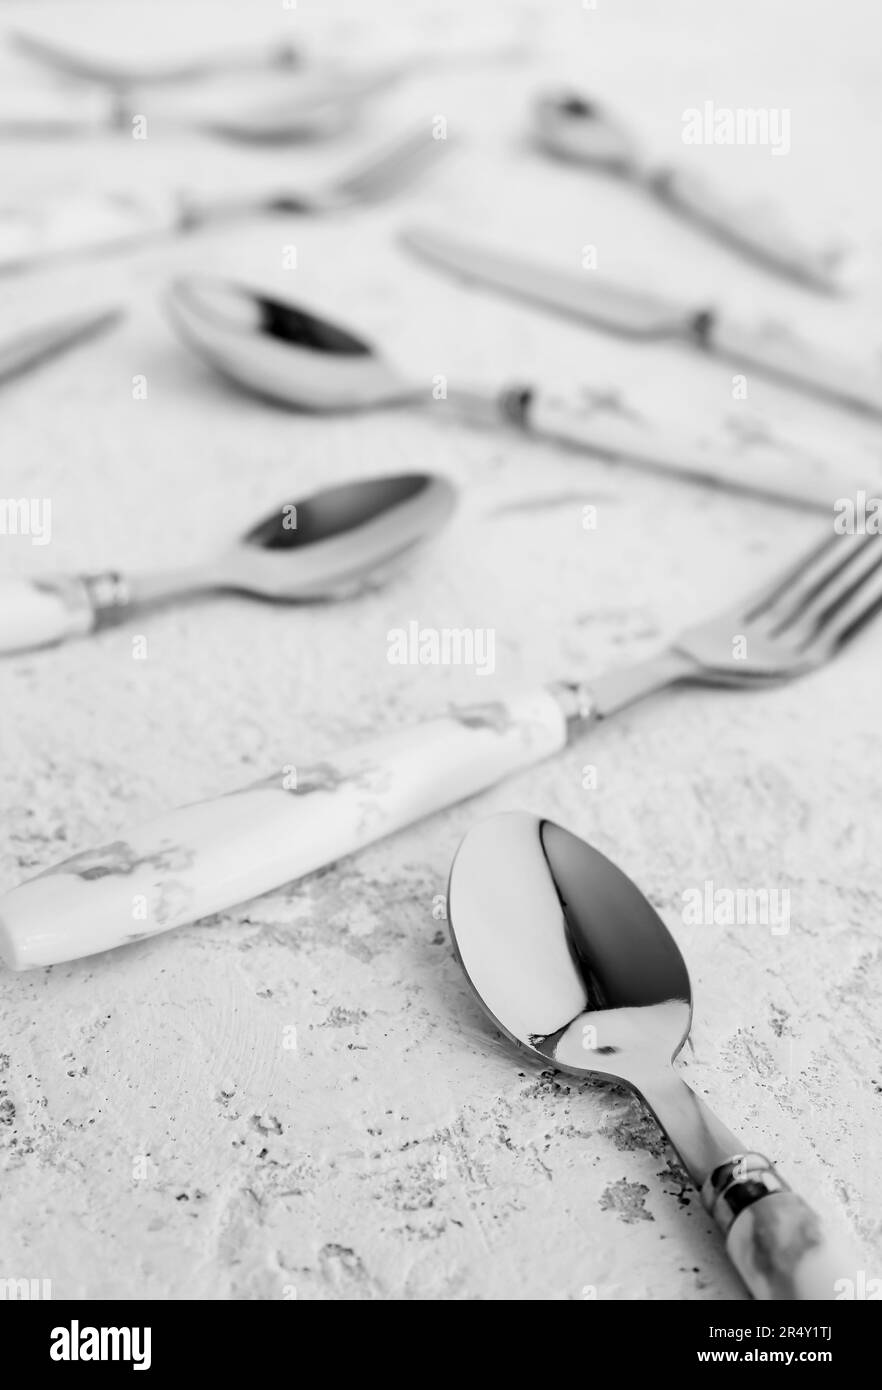 Stainless steel cutlery with plastic handles on white background Stock Photo